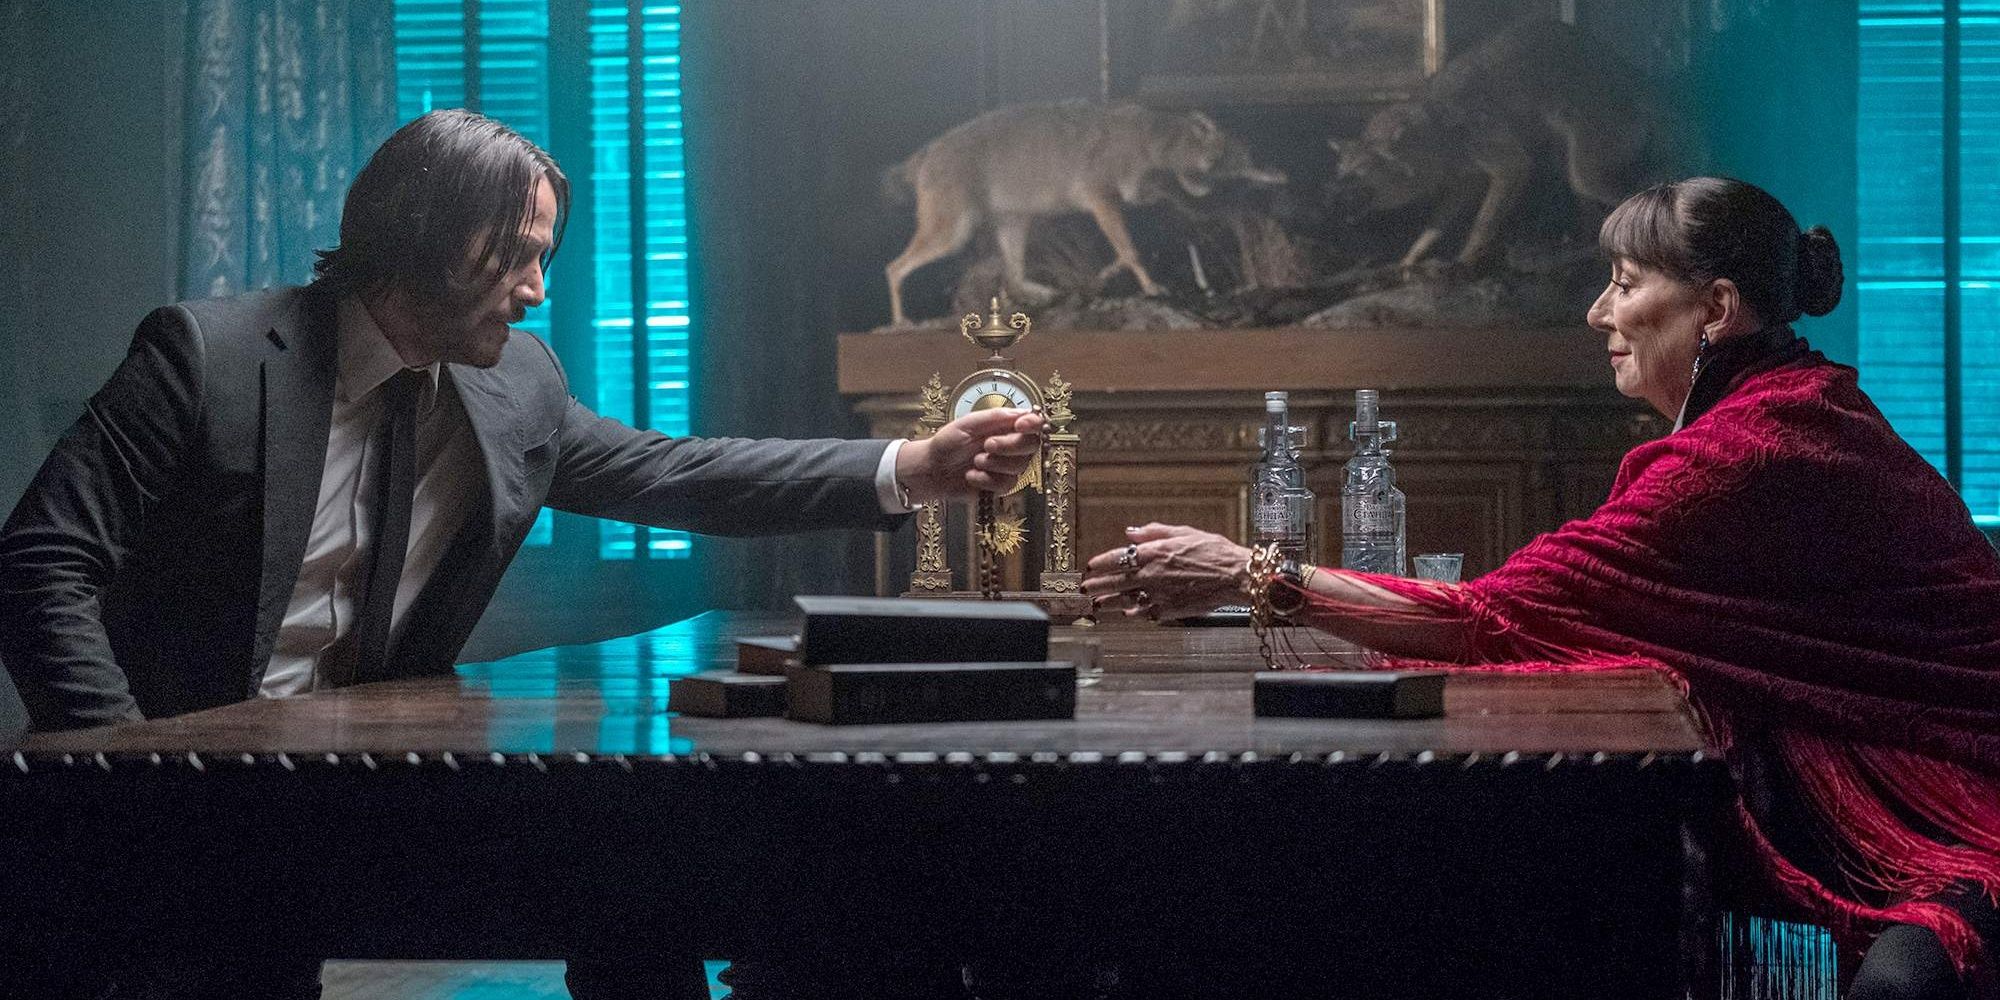 John Wick clinking glasses with woman in a red coat 